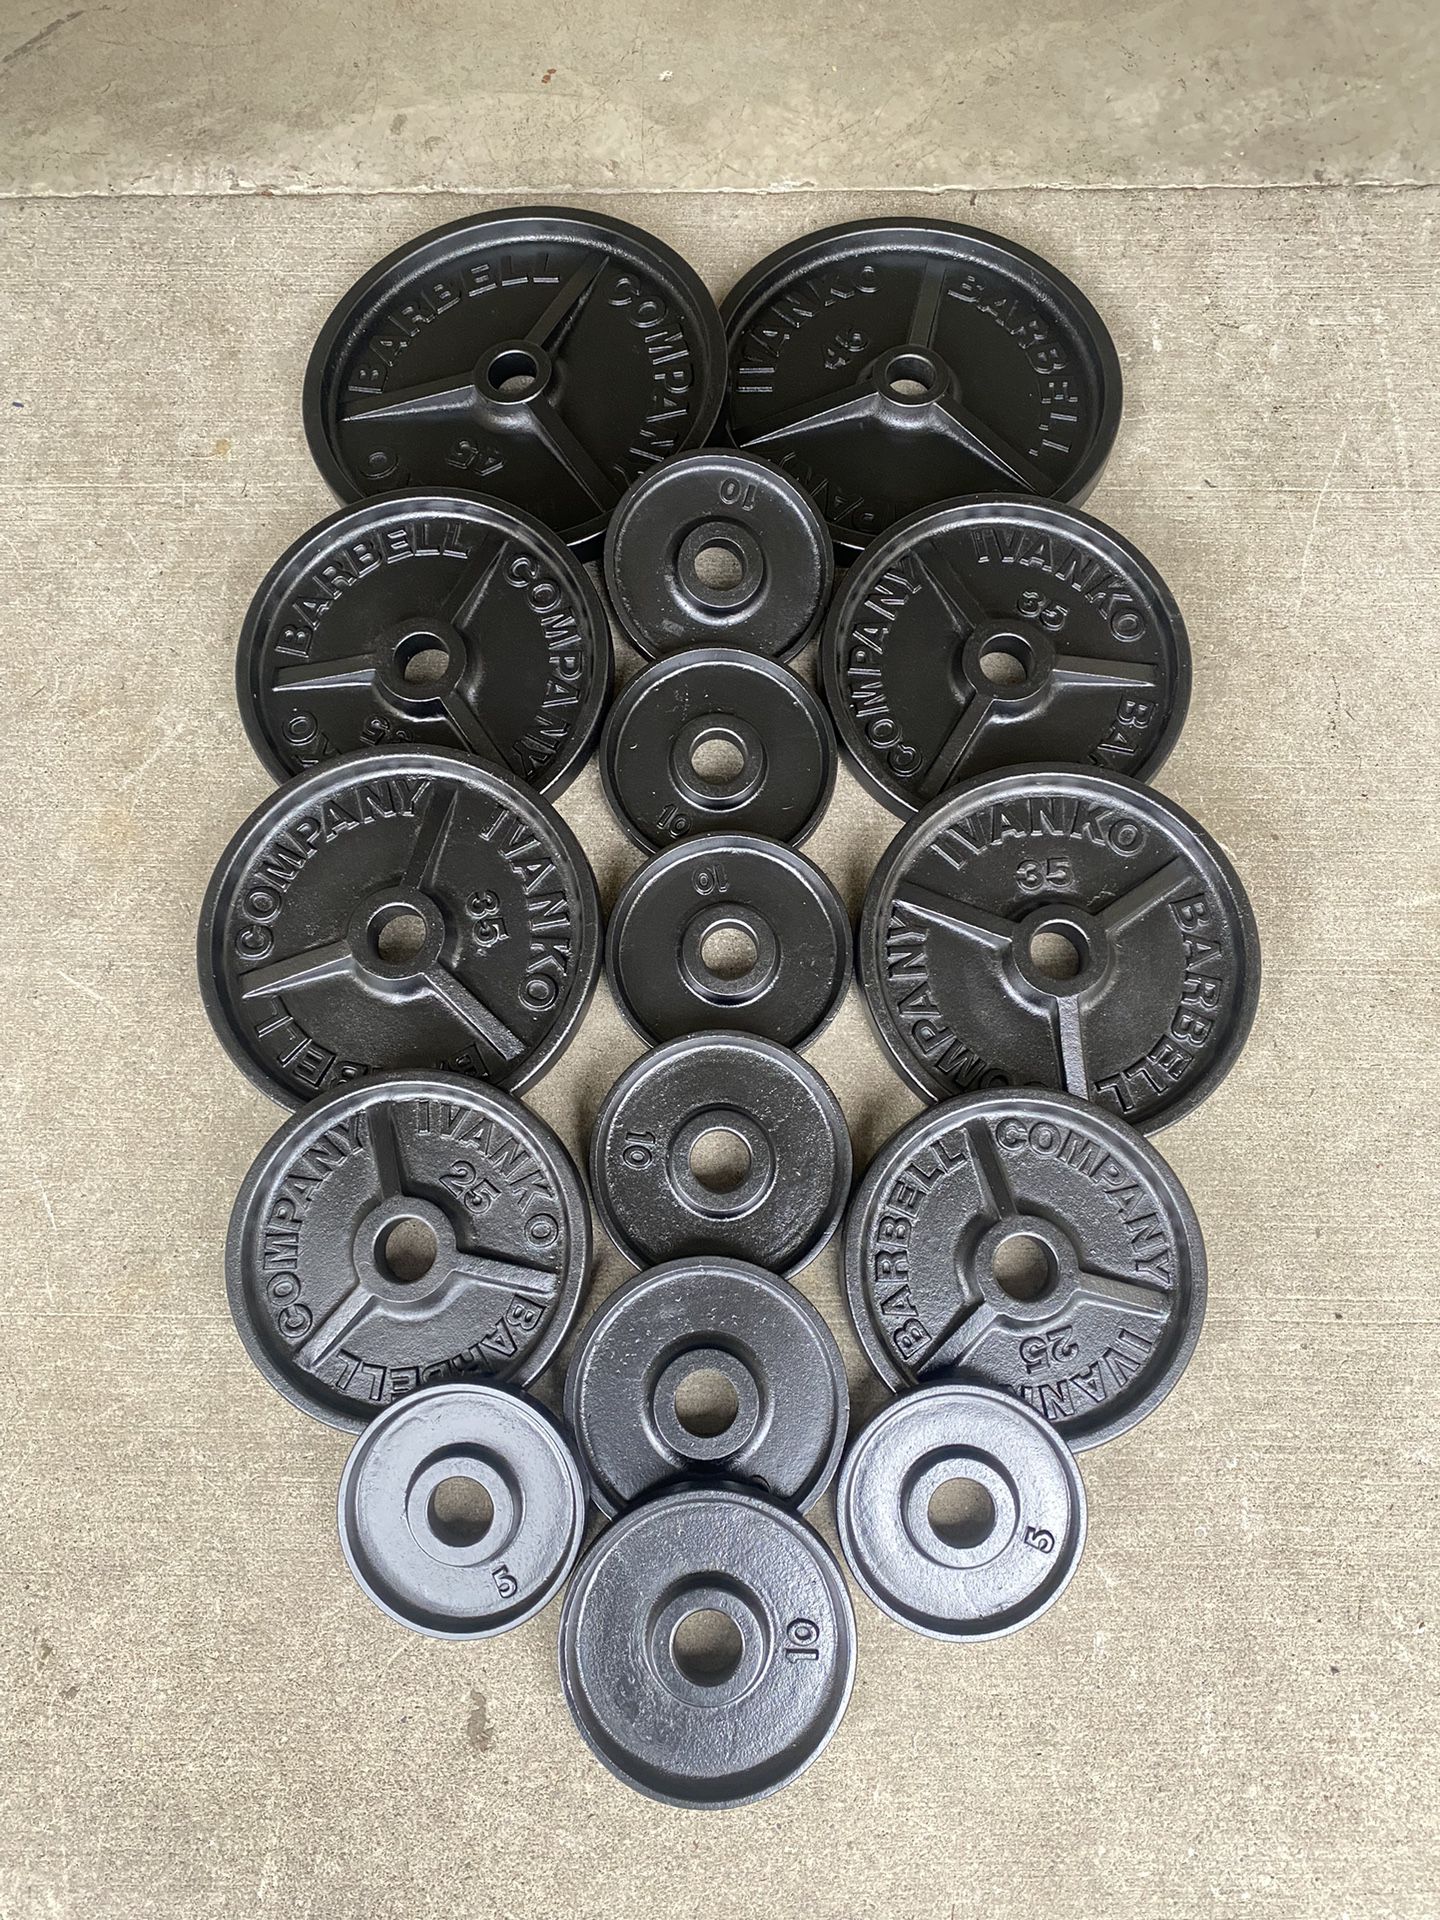 Ivanko Olympic Weights 